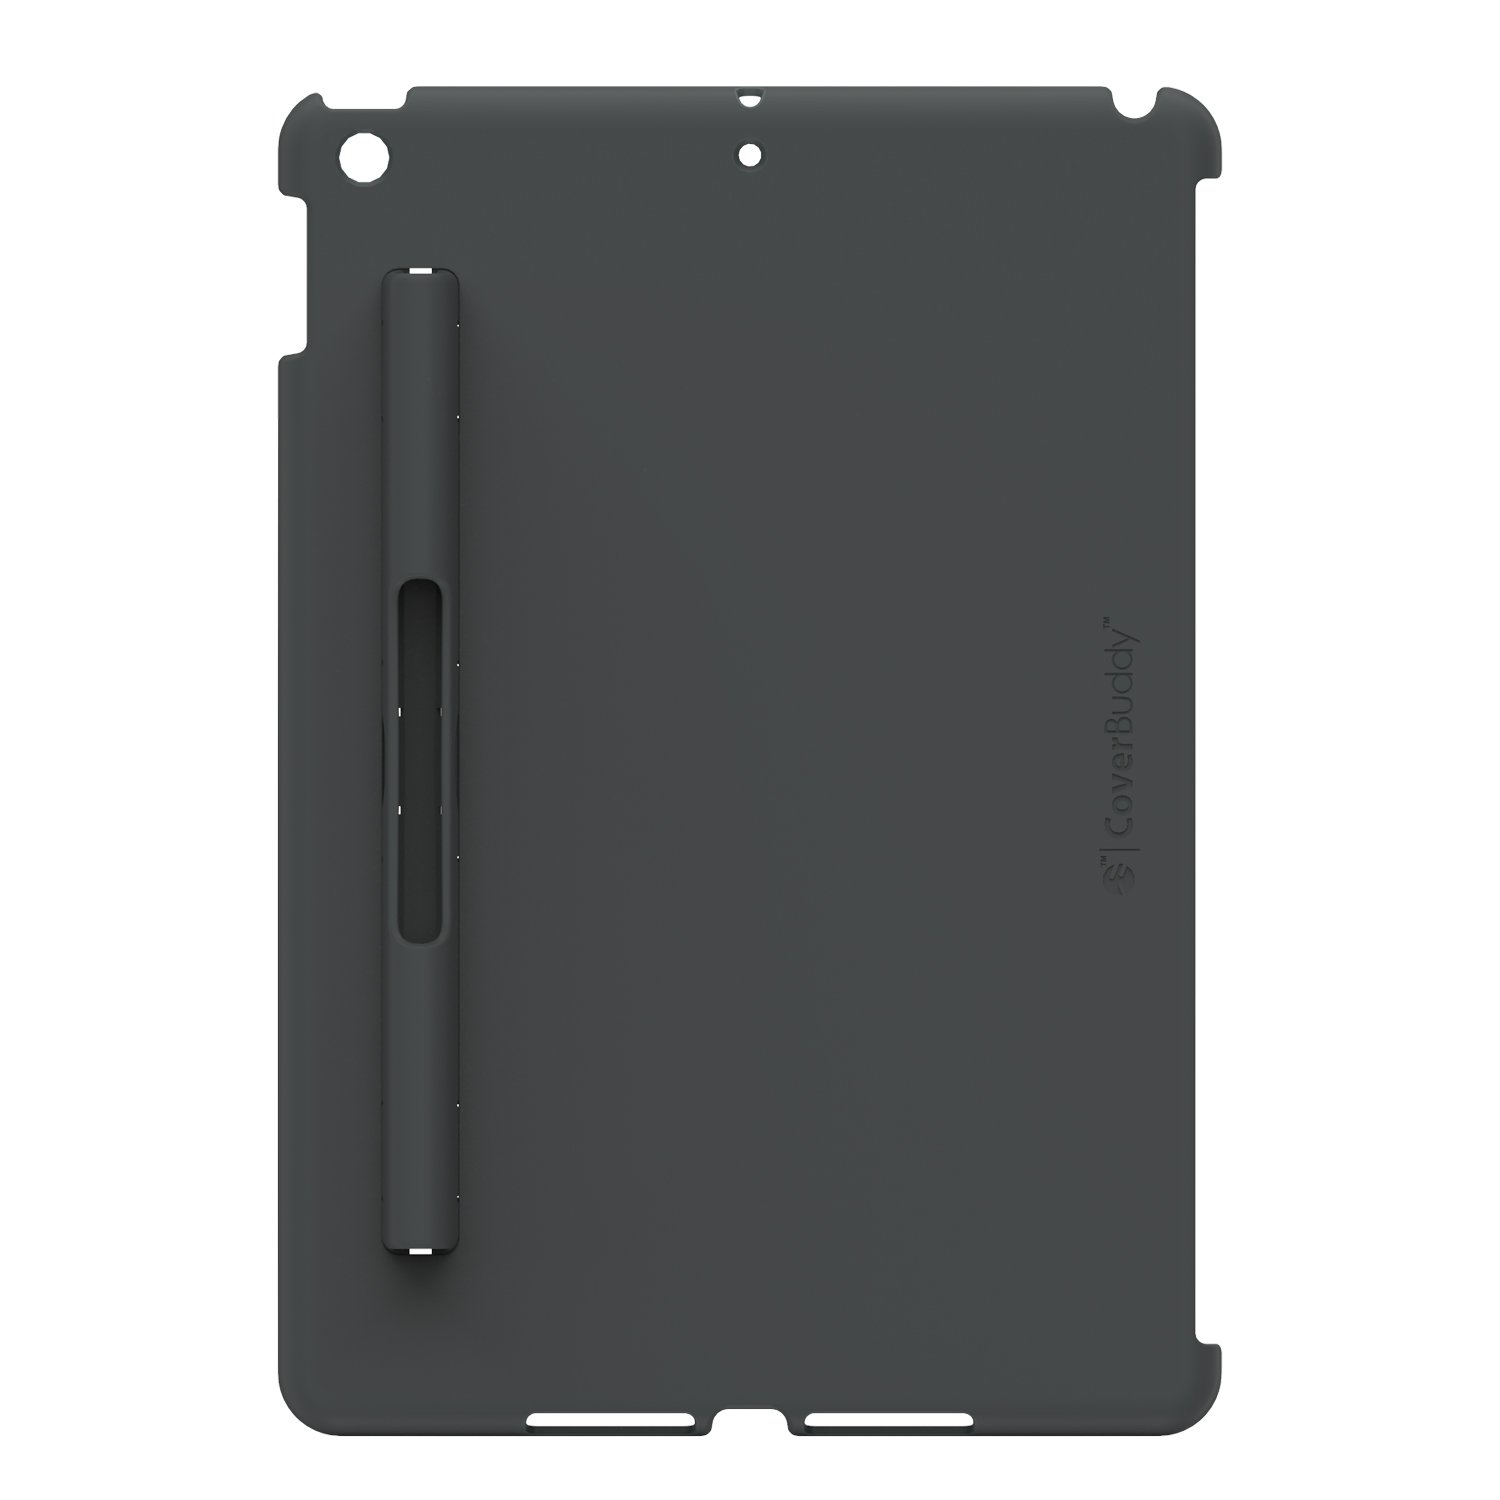 Switcheasy CoverBuddy Case for iPad Pro 10.2 Keyboard Compatible with Pencil Holder, Smoke Default Switcheasy 